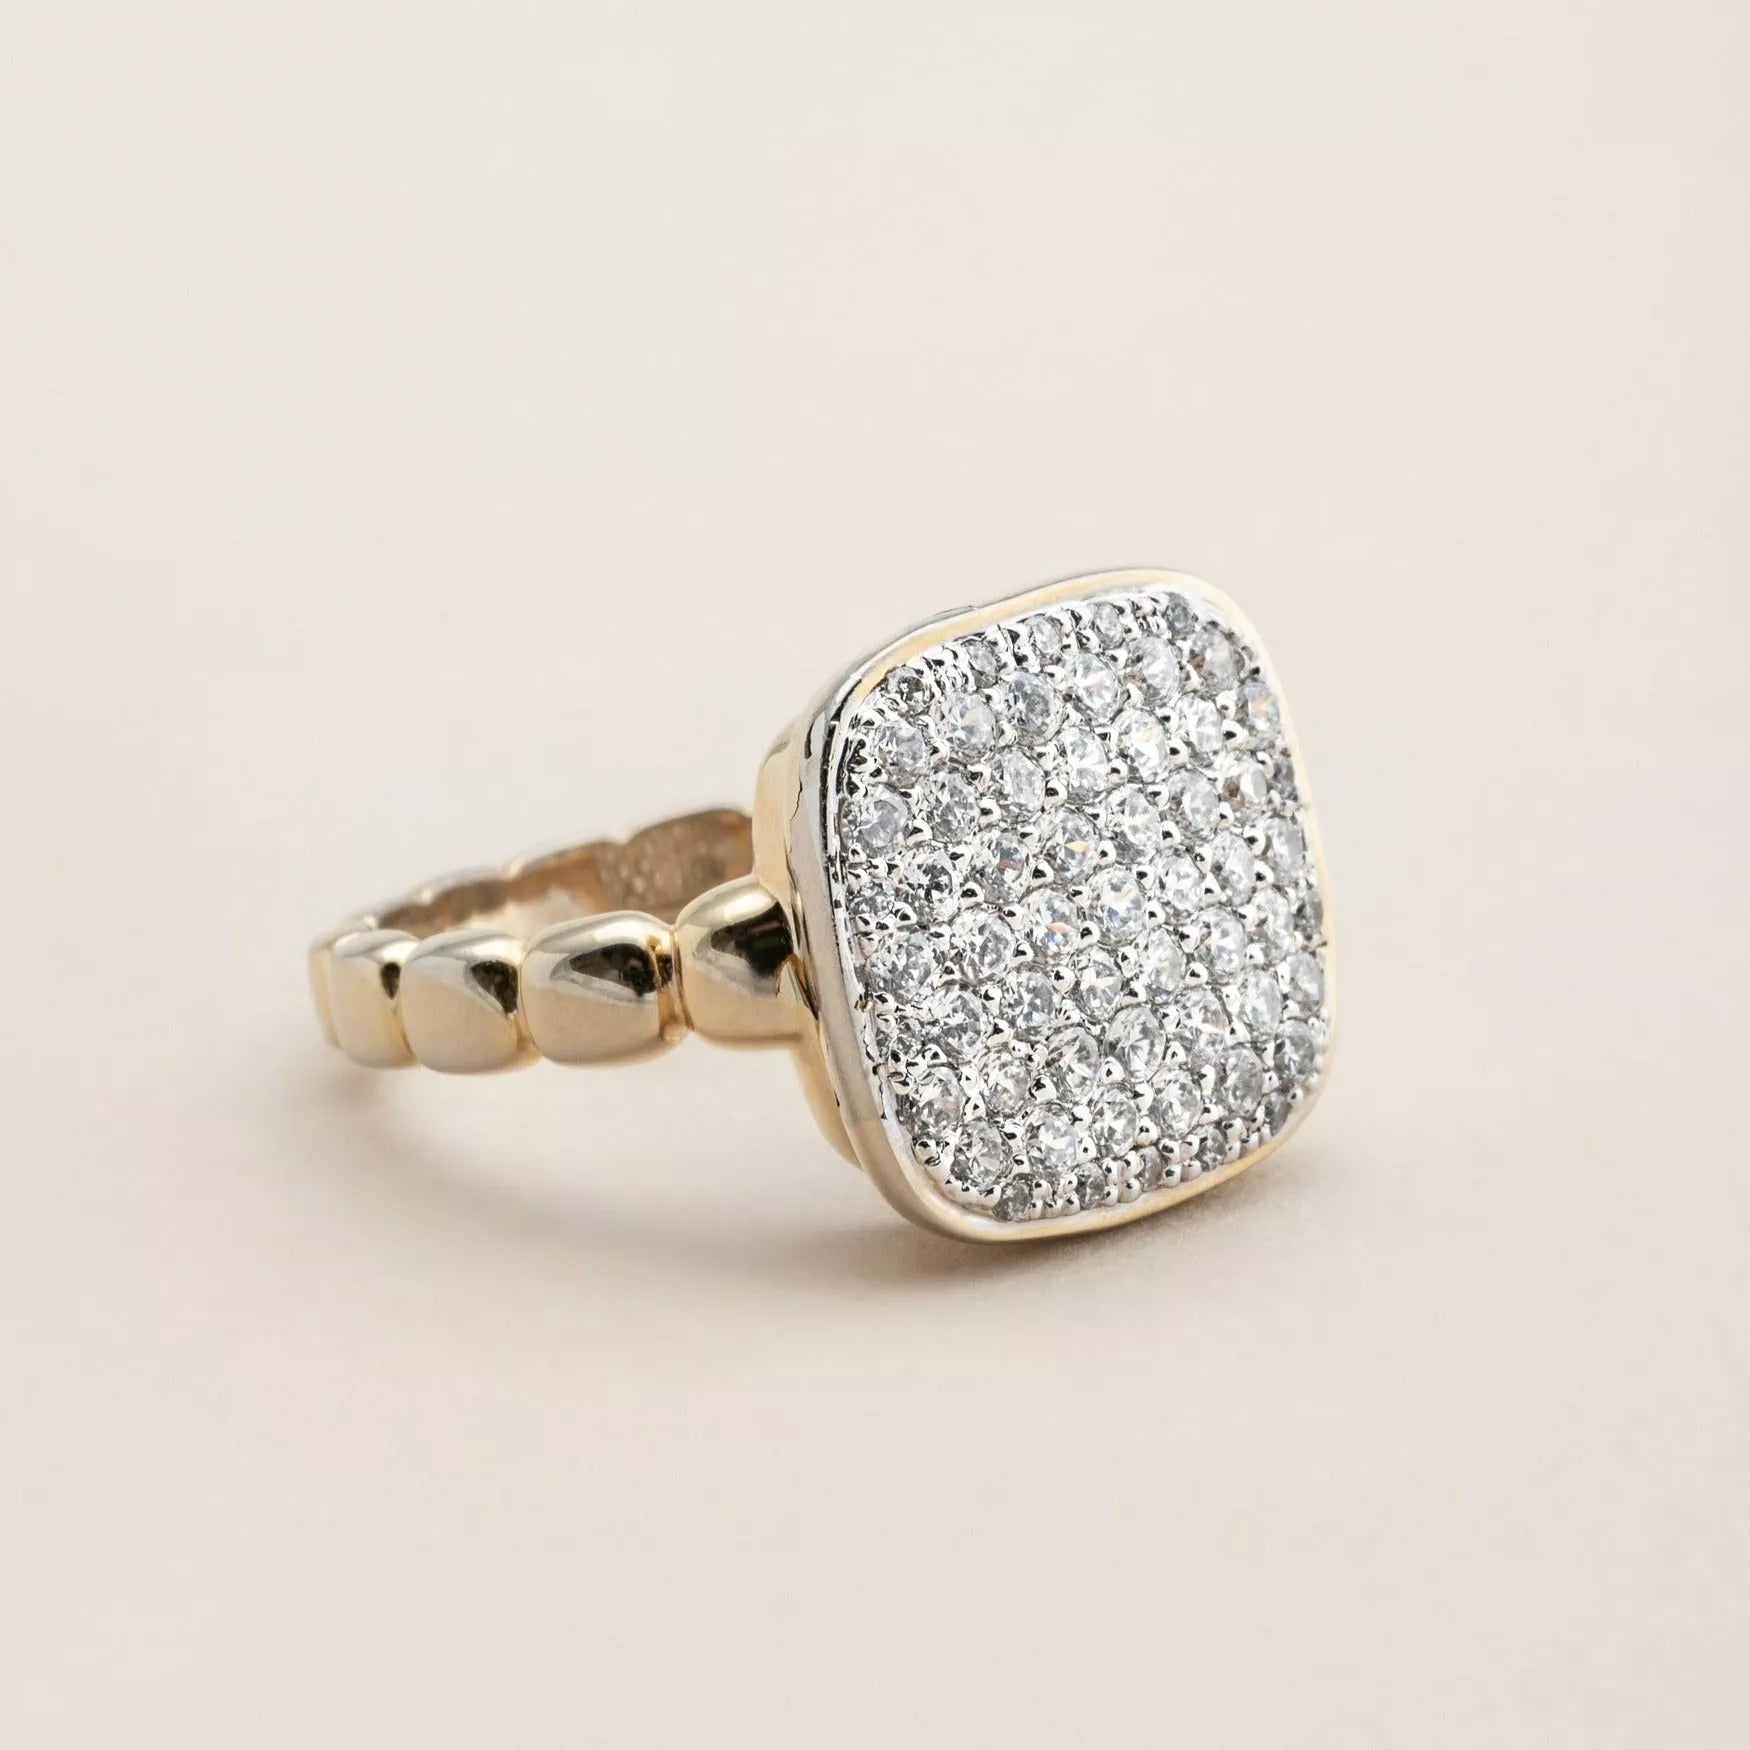 The Square Pave Ring. Recycle Gold